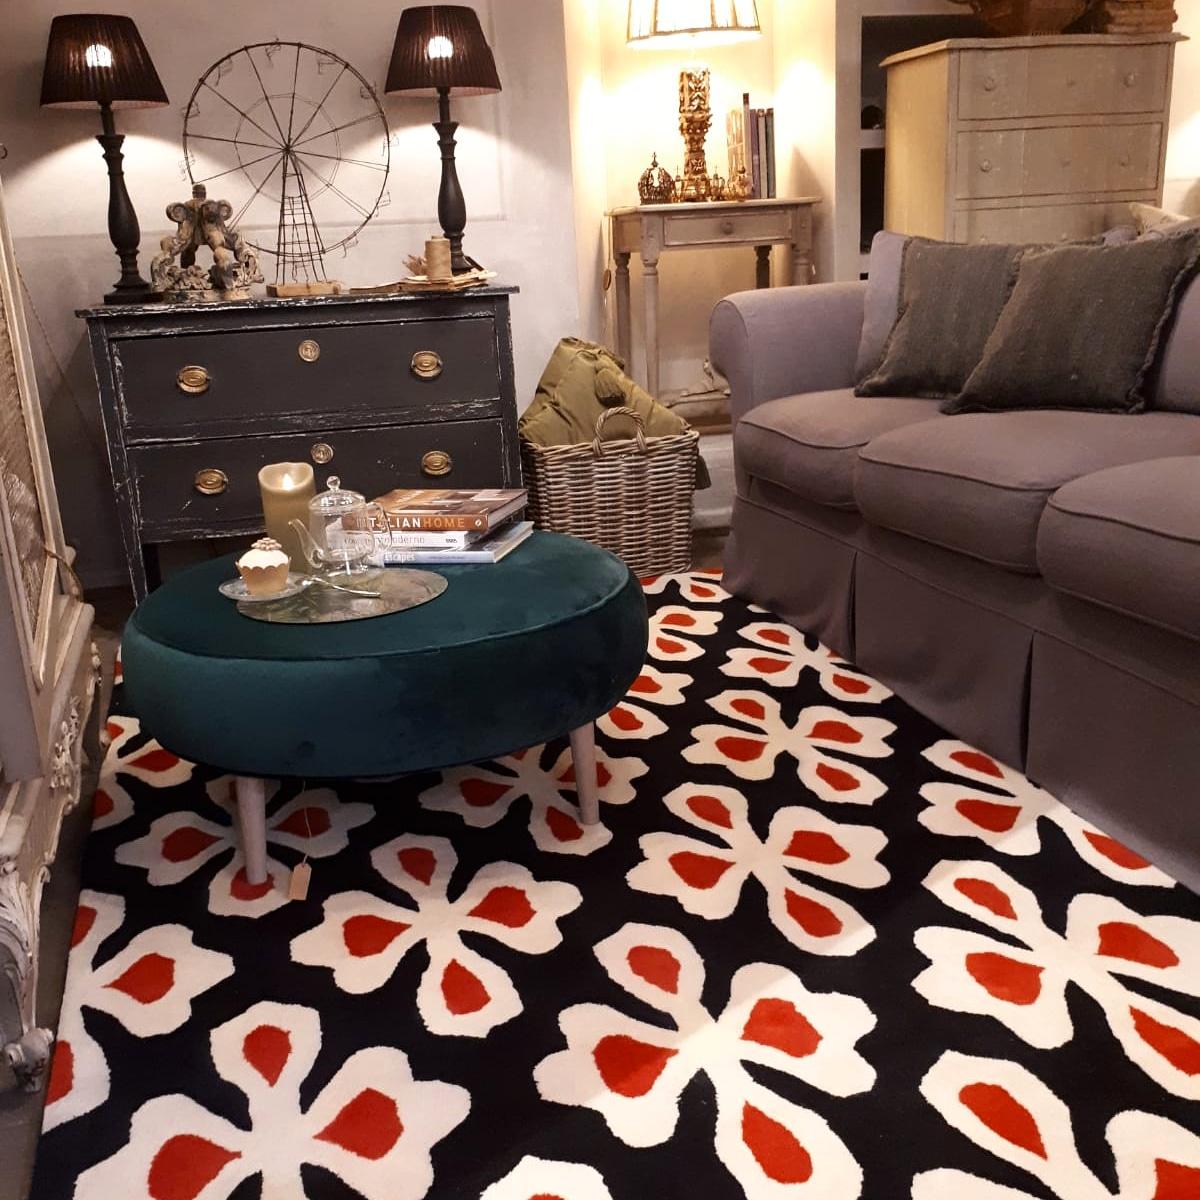 The Flower rug is our reinterpretation of an Ikat design available in our collection.
This handmade and hand-tufted wool rug is one the most charming and elegant accessory to decorate your floor and is available in a size of 3 x 2 metres (118 x 79